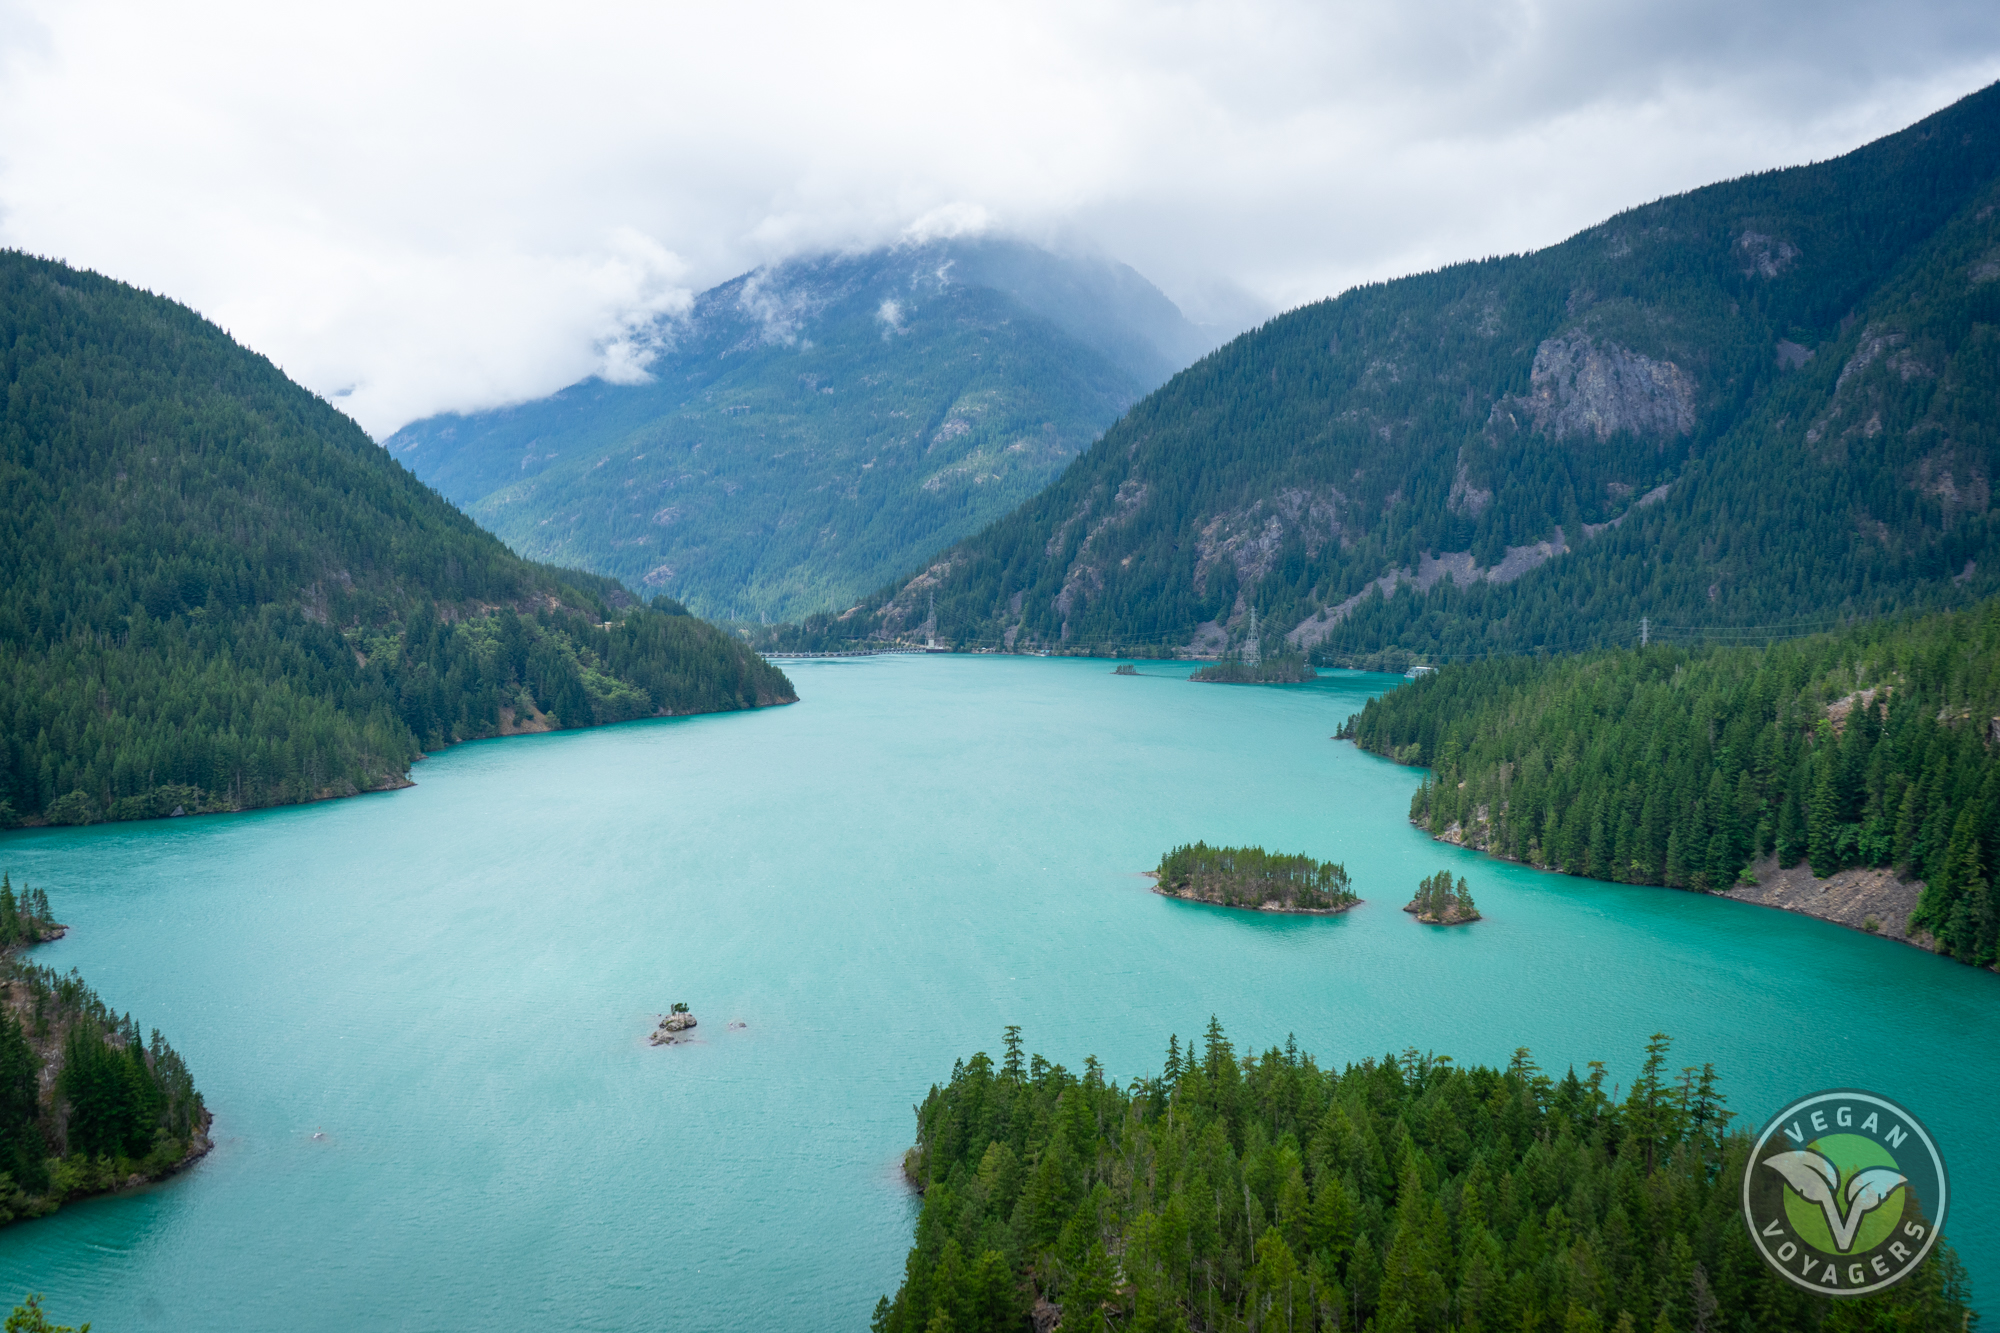 Diablo Lake | How to Take a Driving Tour of North Cascades National Park